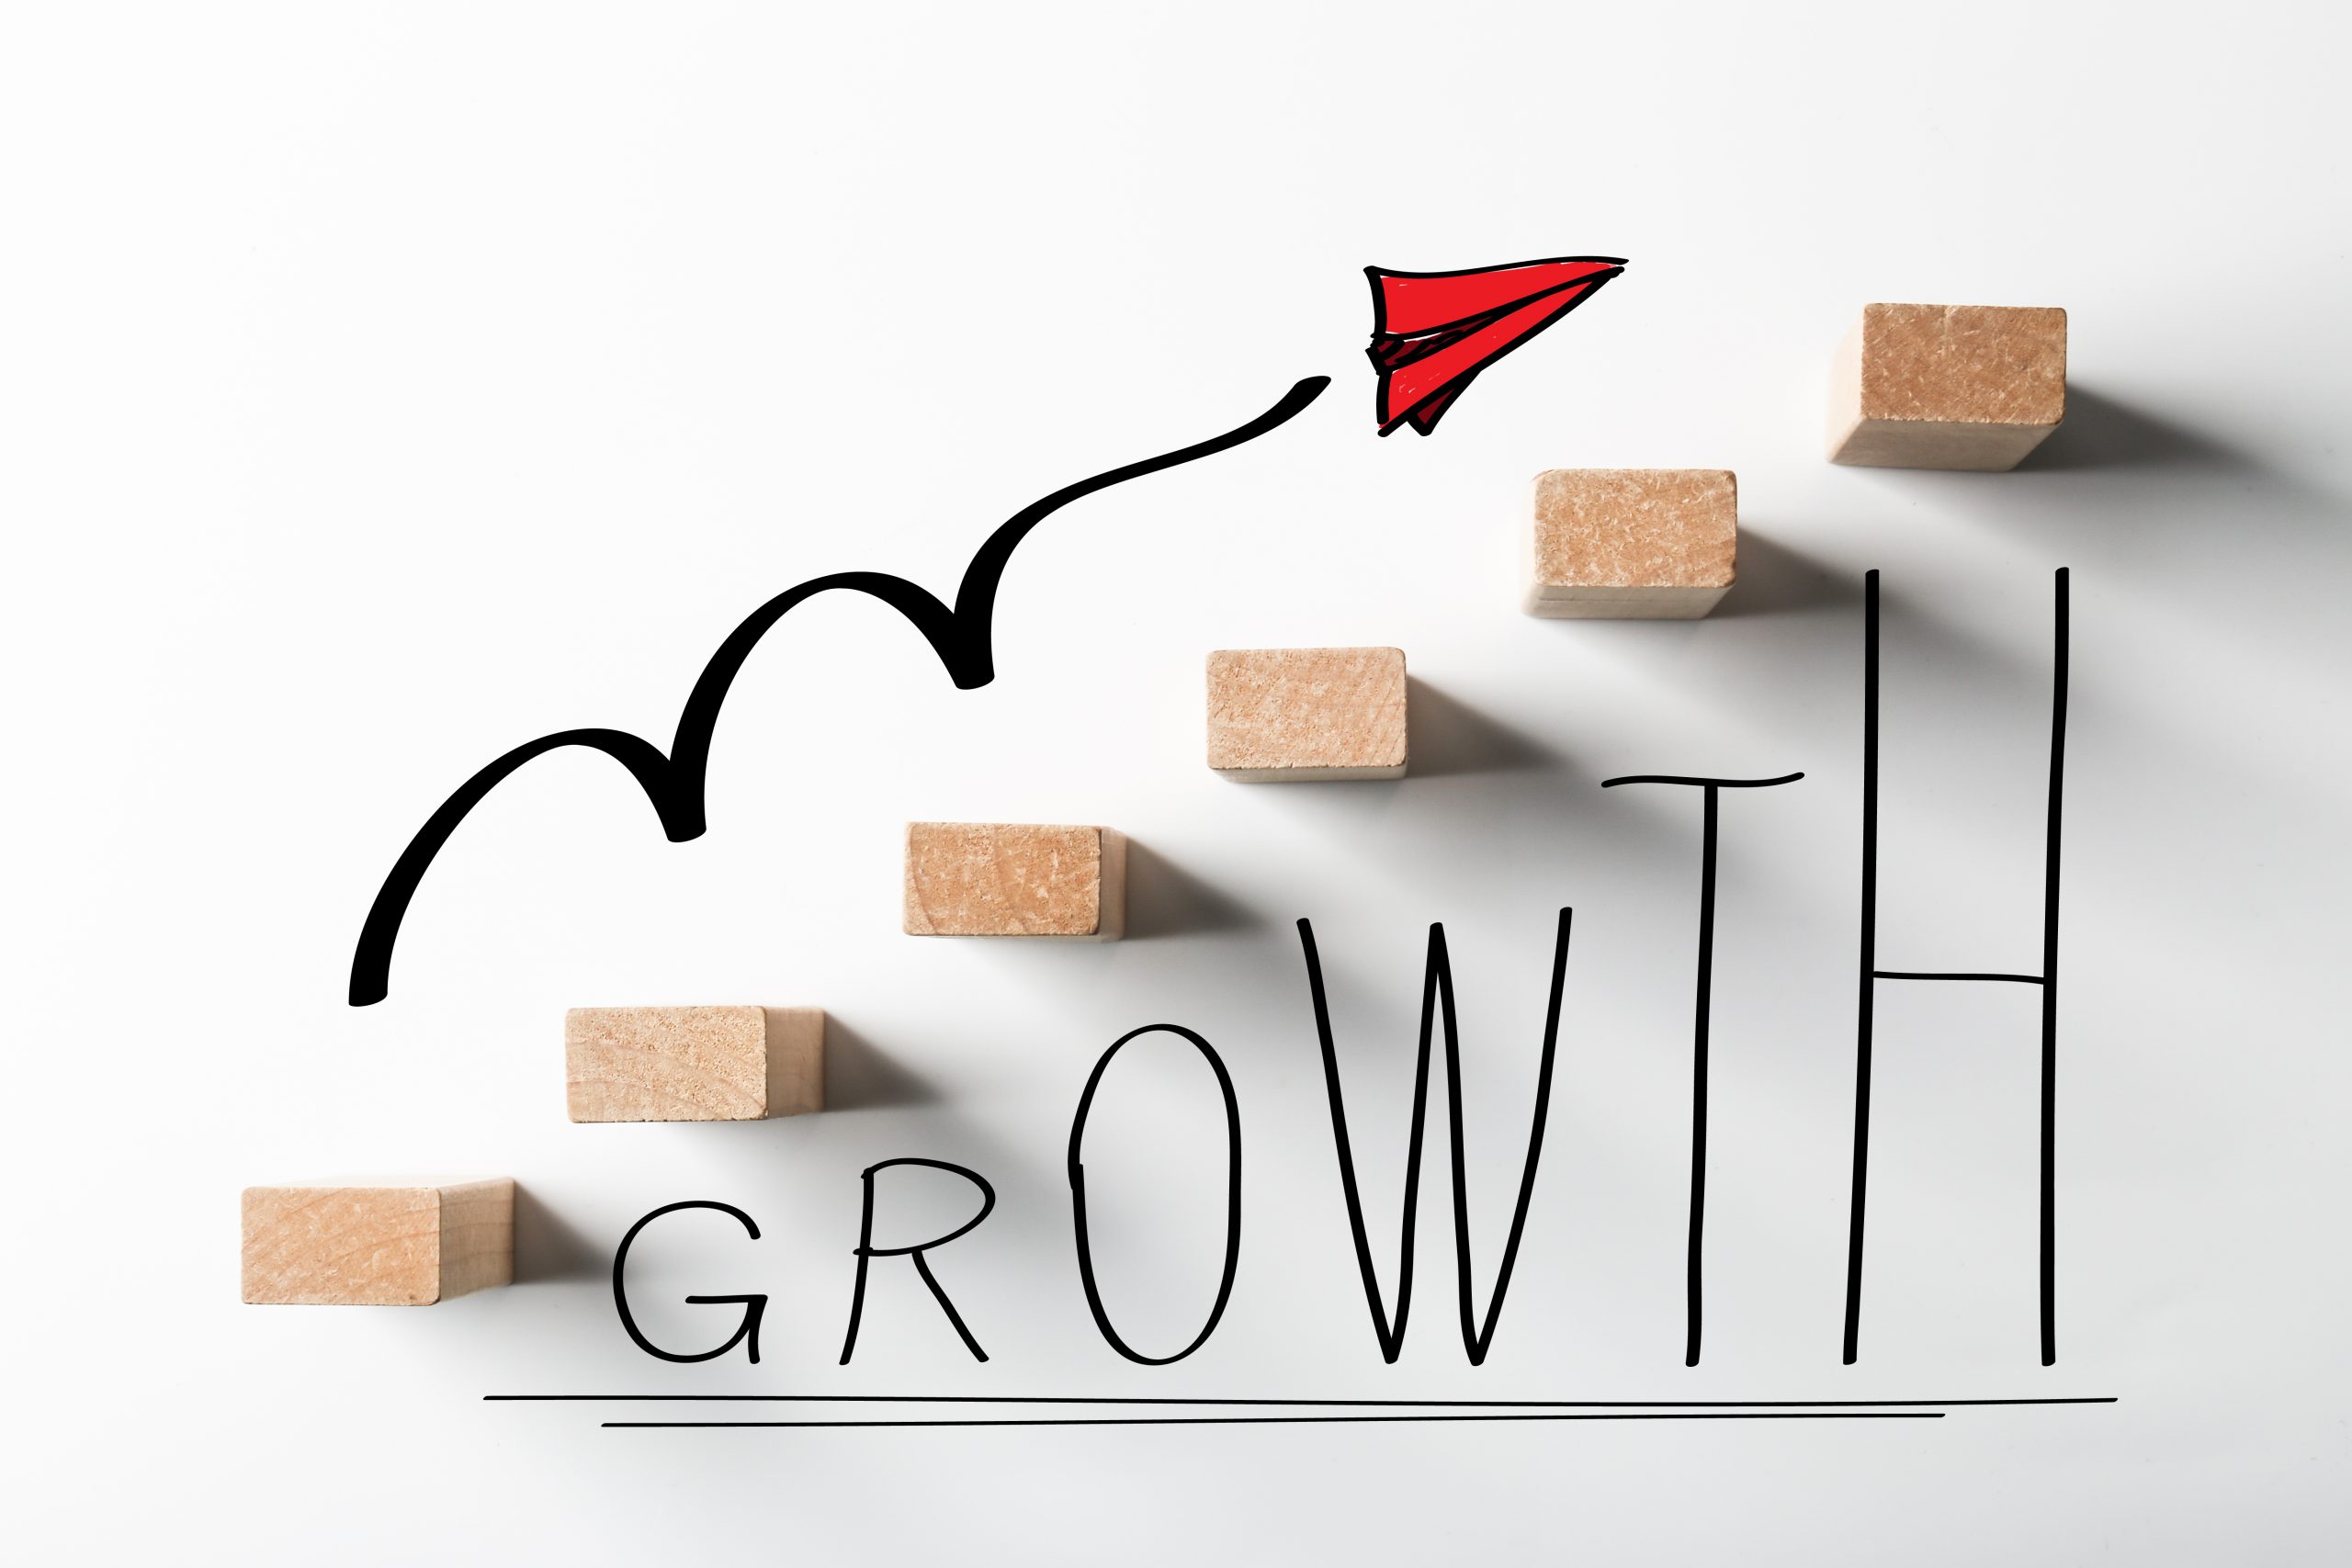 Who can get a boost via the Business Growth Fund